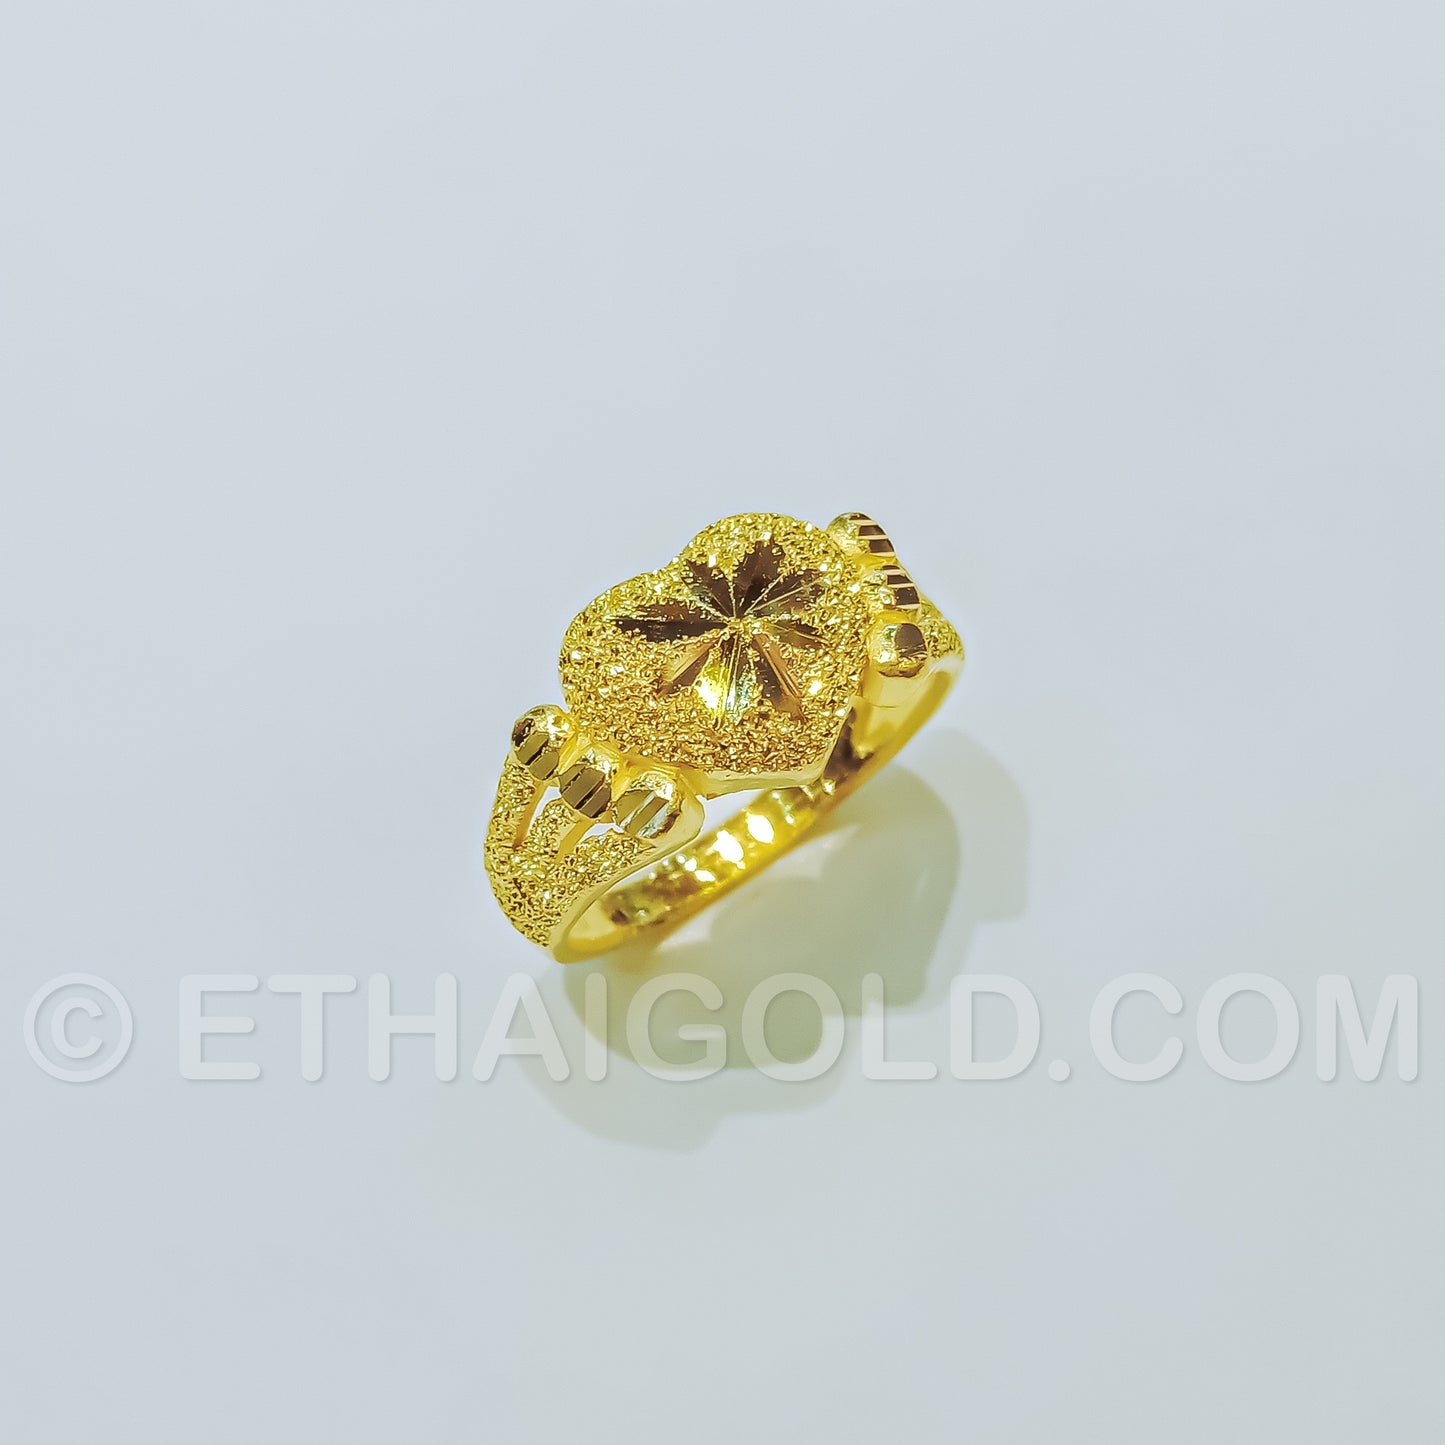 1/4 BAHT POLISHED SPARKLING DIAMOND-CUT SOLID HEART RING IN 23K GOLD (ID: R0501S)